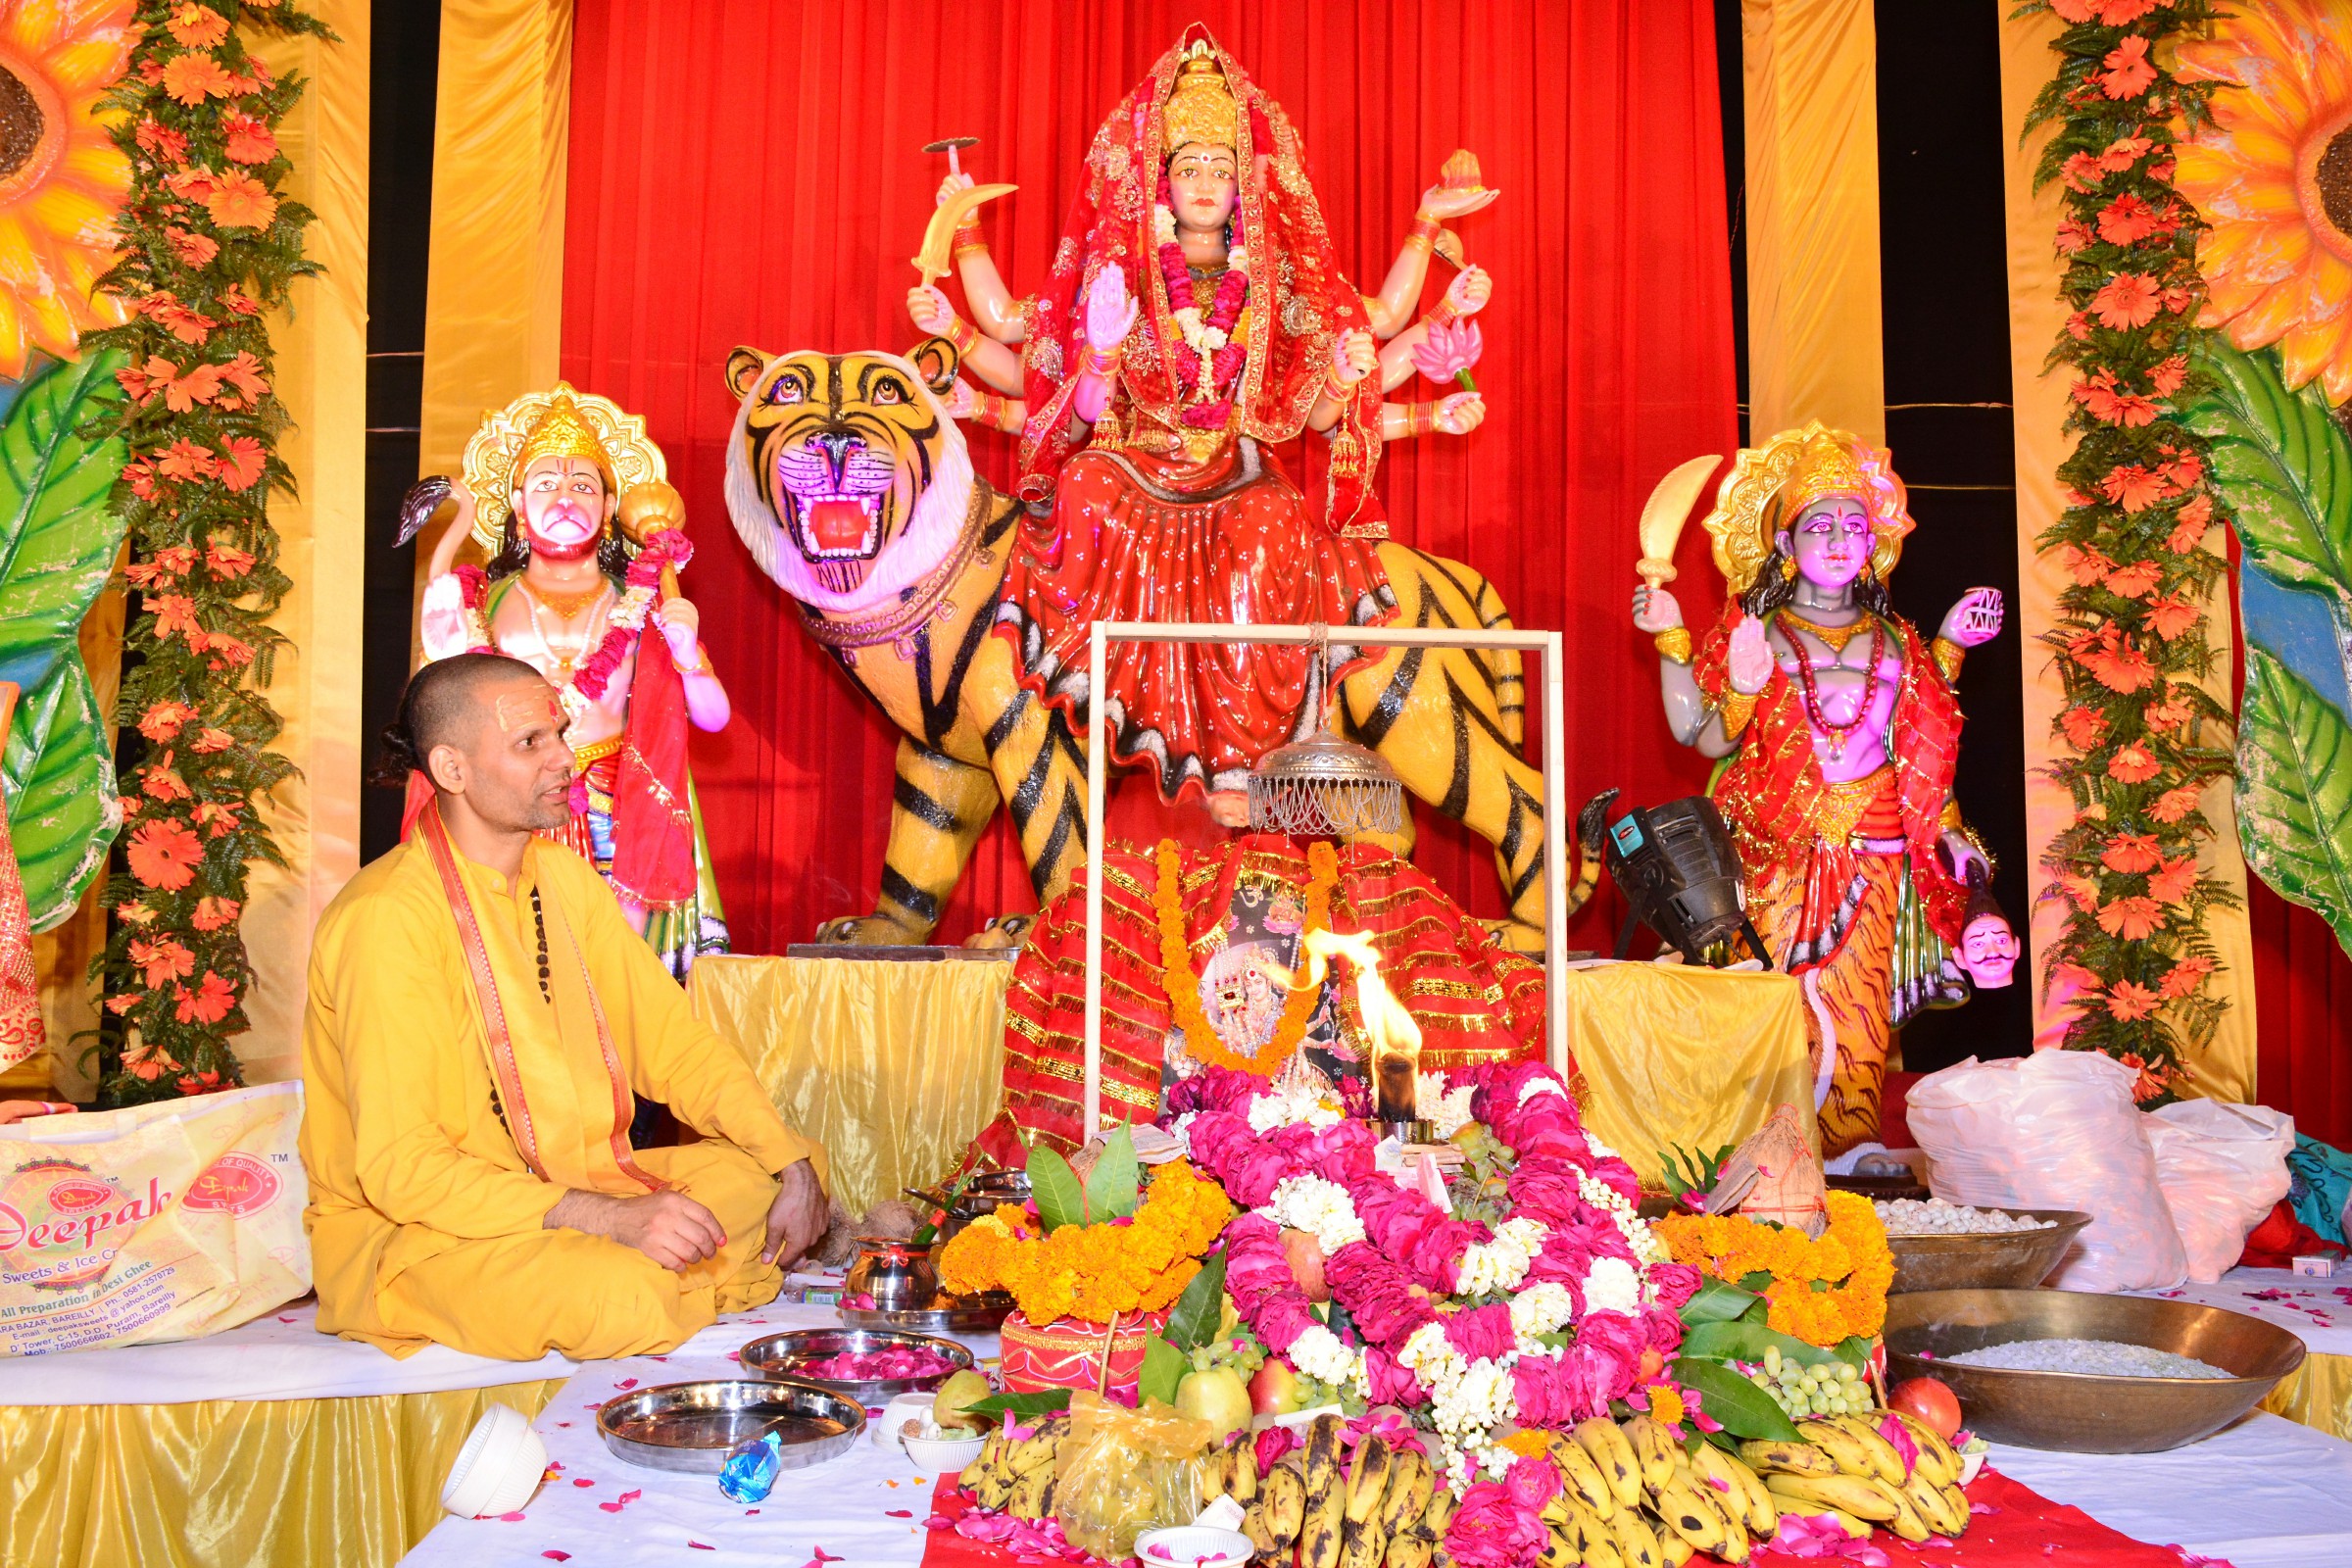 Maa Bhagwati Jagran at Bareilly, U.P. – The Key to Connect with God